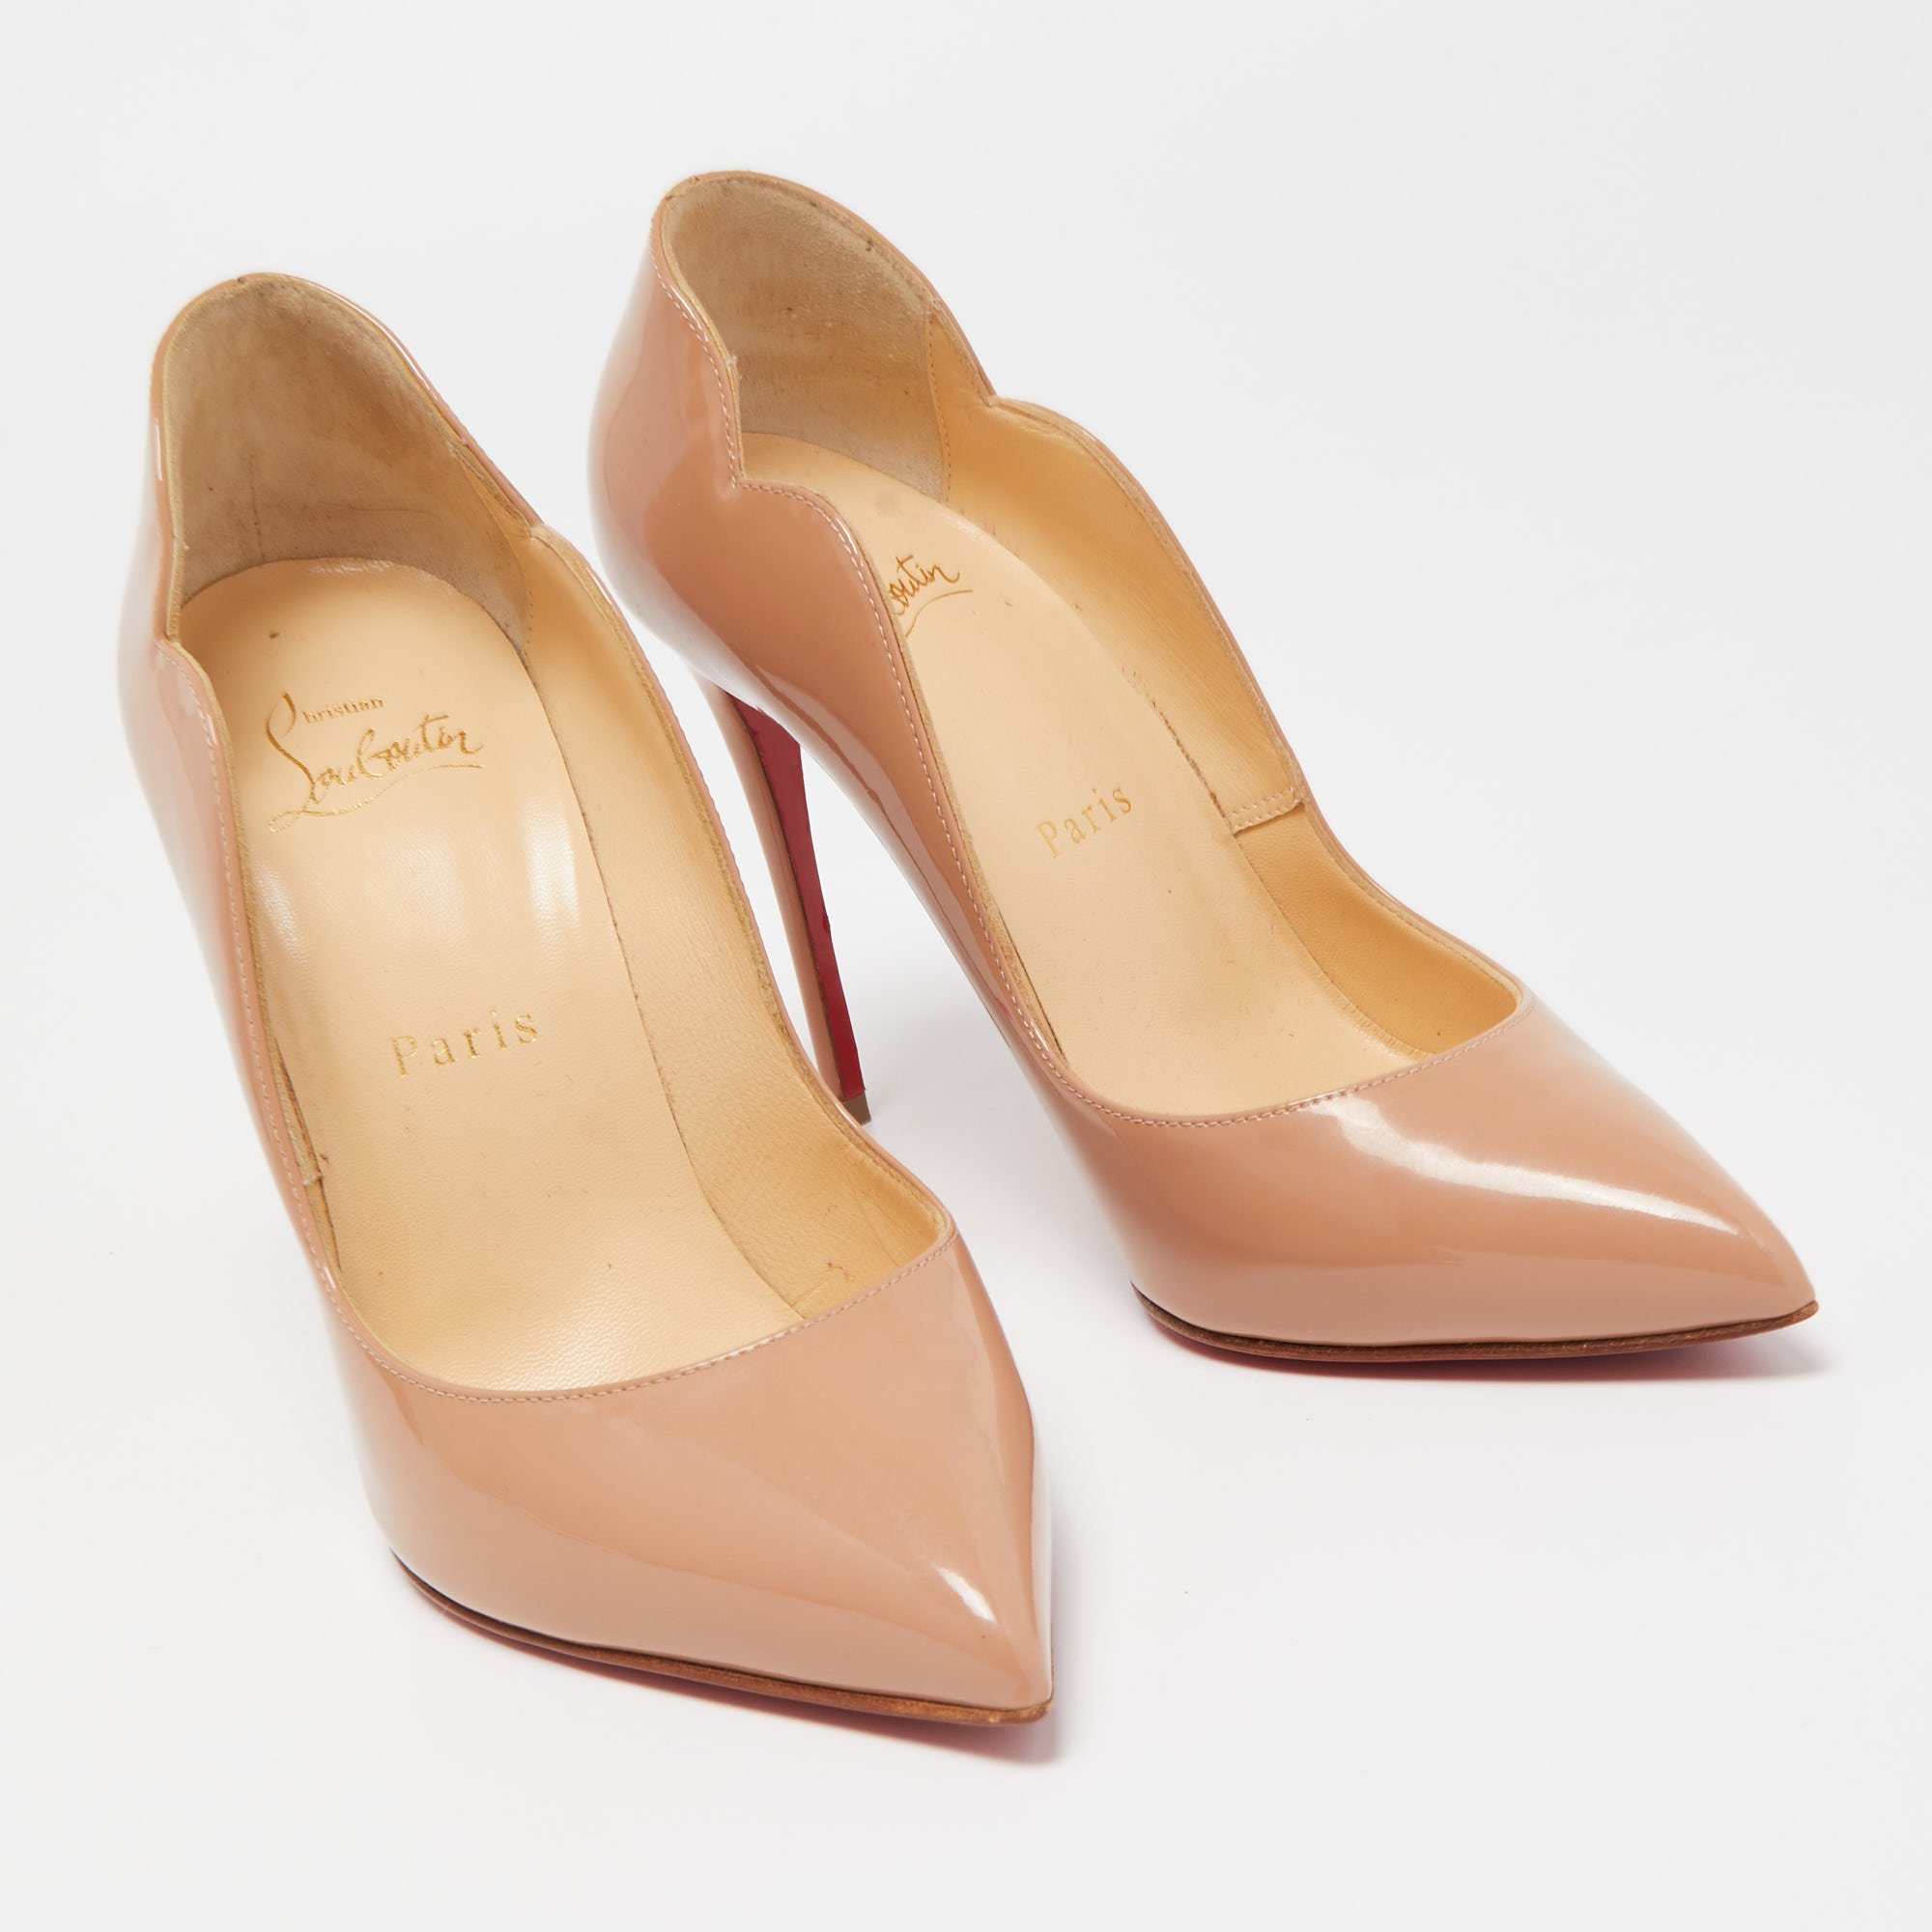 Christian Louboutin Beige Patent Leather Hot Chick Pointed Toe Pumps Size 36